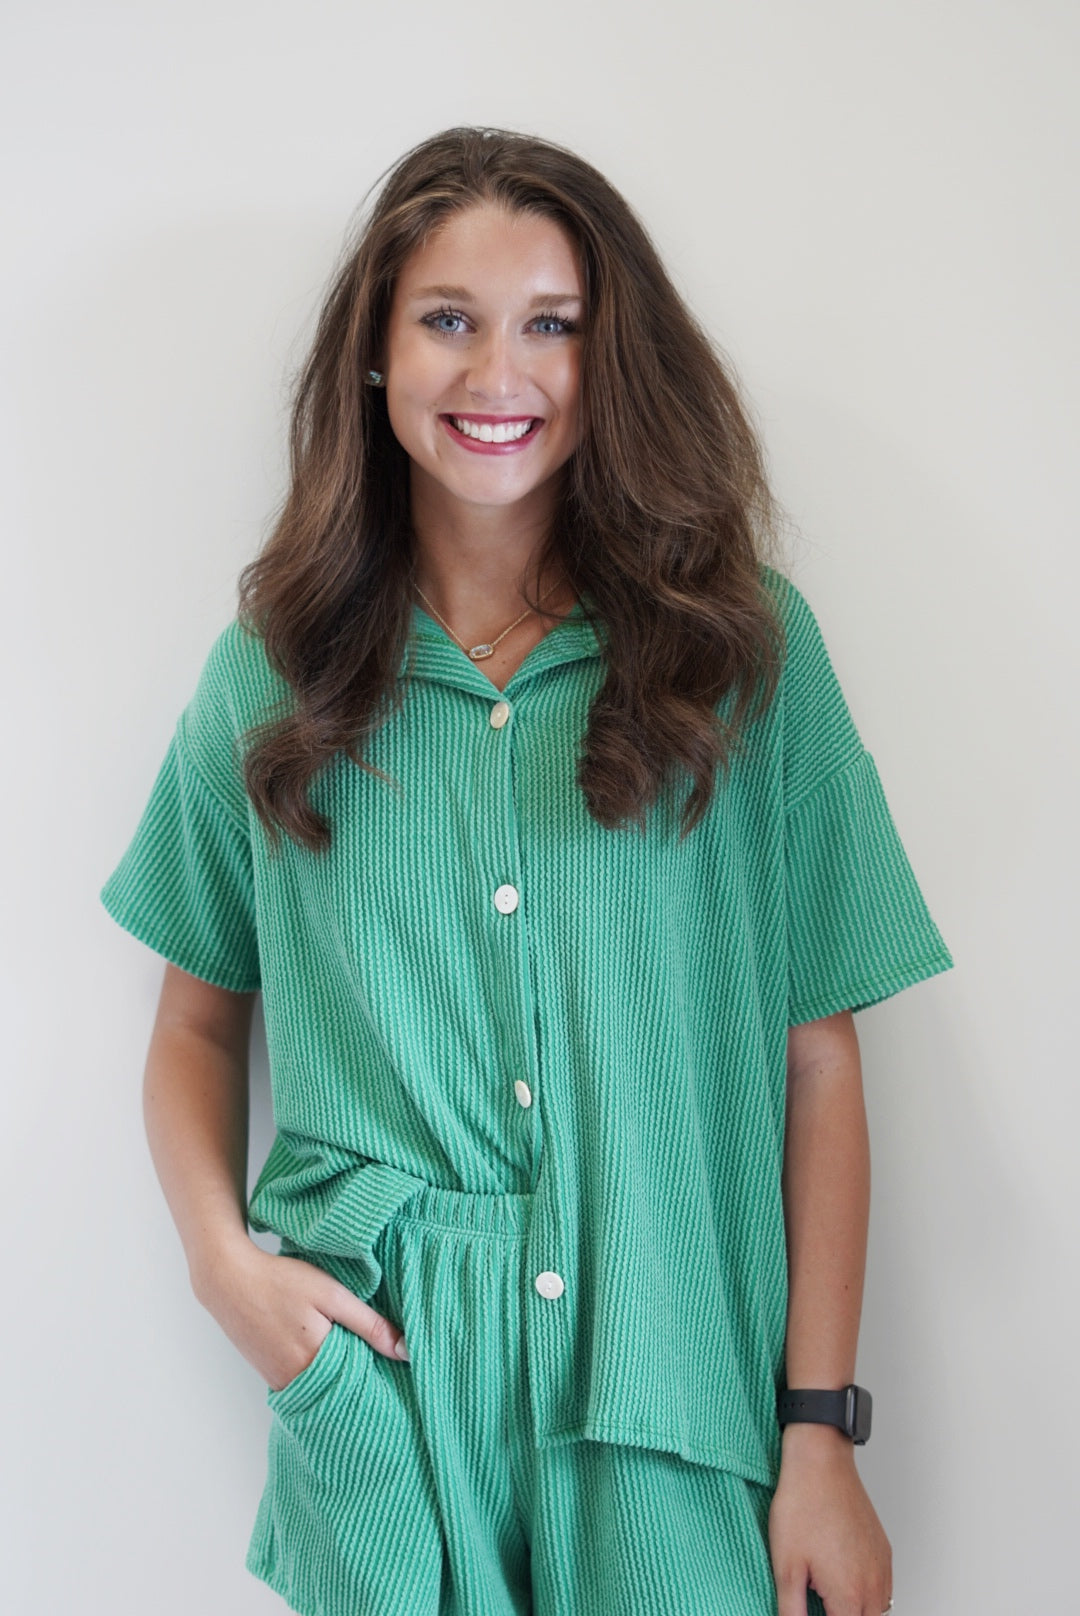 Tiffany Everyday Rib Top  Collar  Button Up Short Sleeved Rib Fabric  76% Polyester 21% Rayon 3% Spandex Hand Wash Cold, Do Not Bleach, Line or Hang Dry Model is wearing size: small